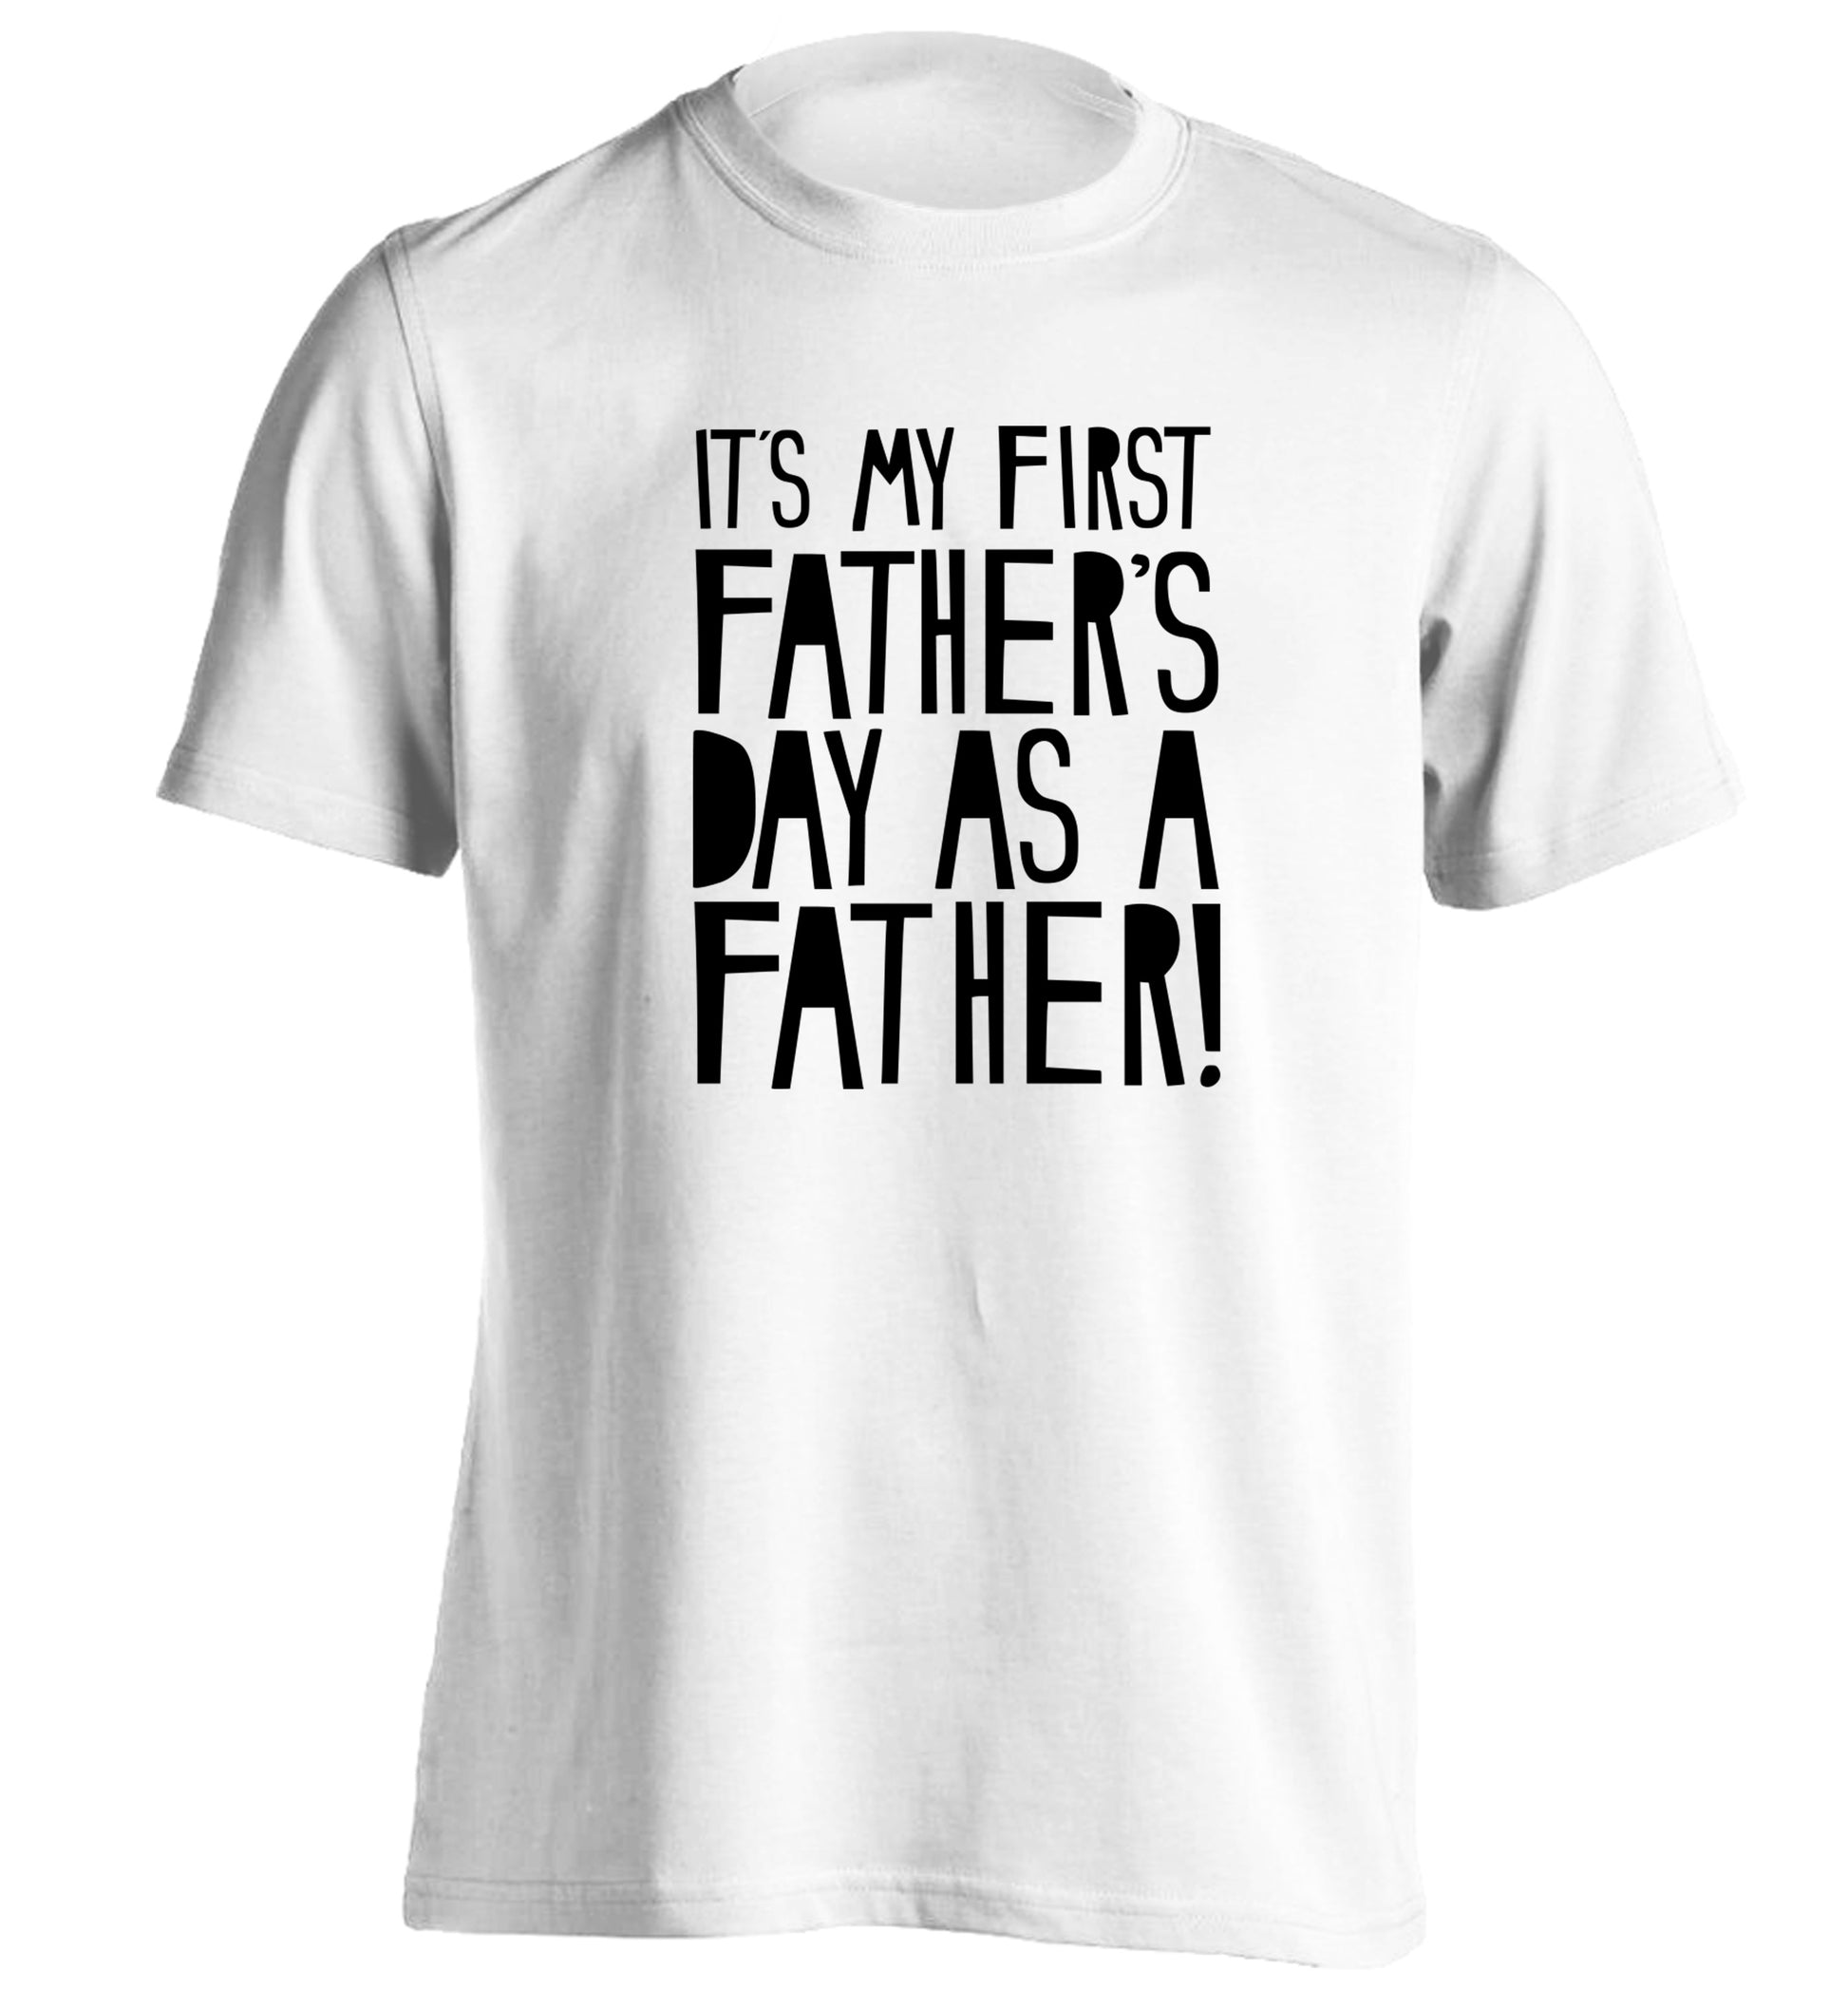 It's my first Father's Day as a father! adults unisex white Tshirt 2XL